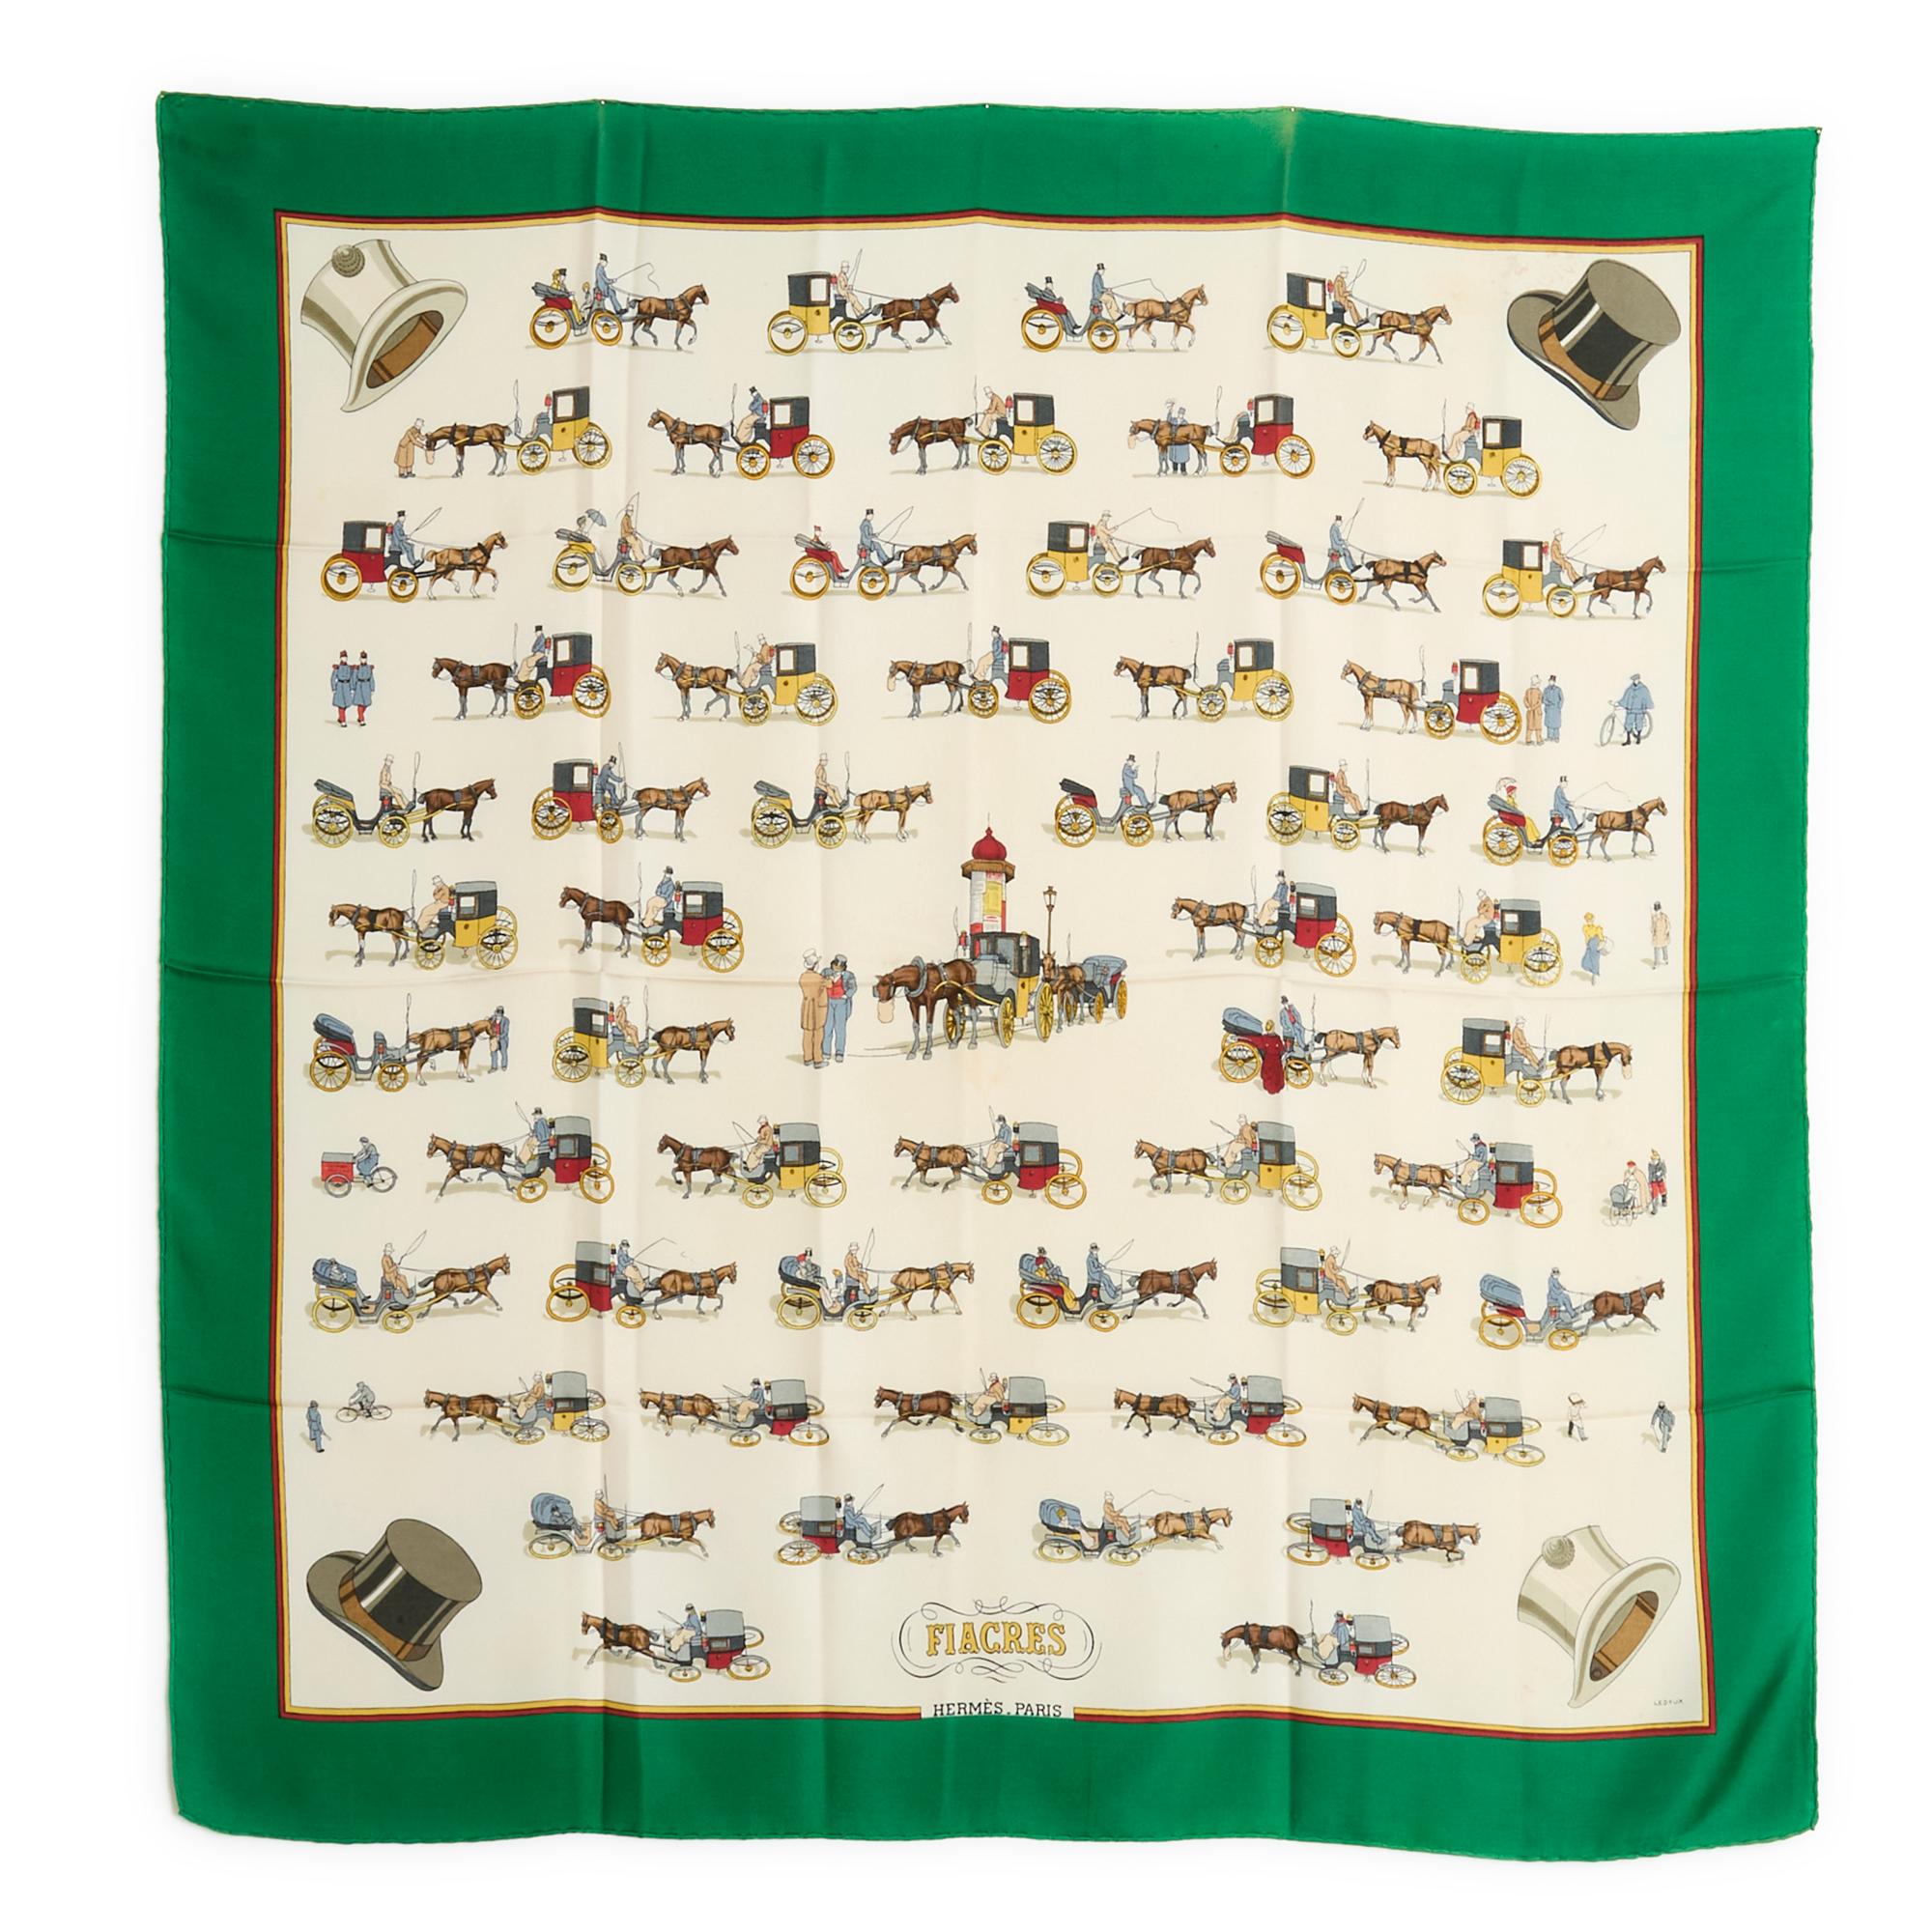 Hermès square 90 scarf in silk twill, Fiacres pattern by Philippe Ledoux, published in 1965 and never reissued, with green edge. Width 90 cm x length 90 cm approximately. The square is vintage (and rare) and it shows some traces of its age but it